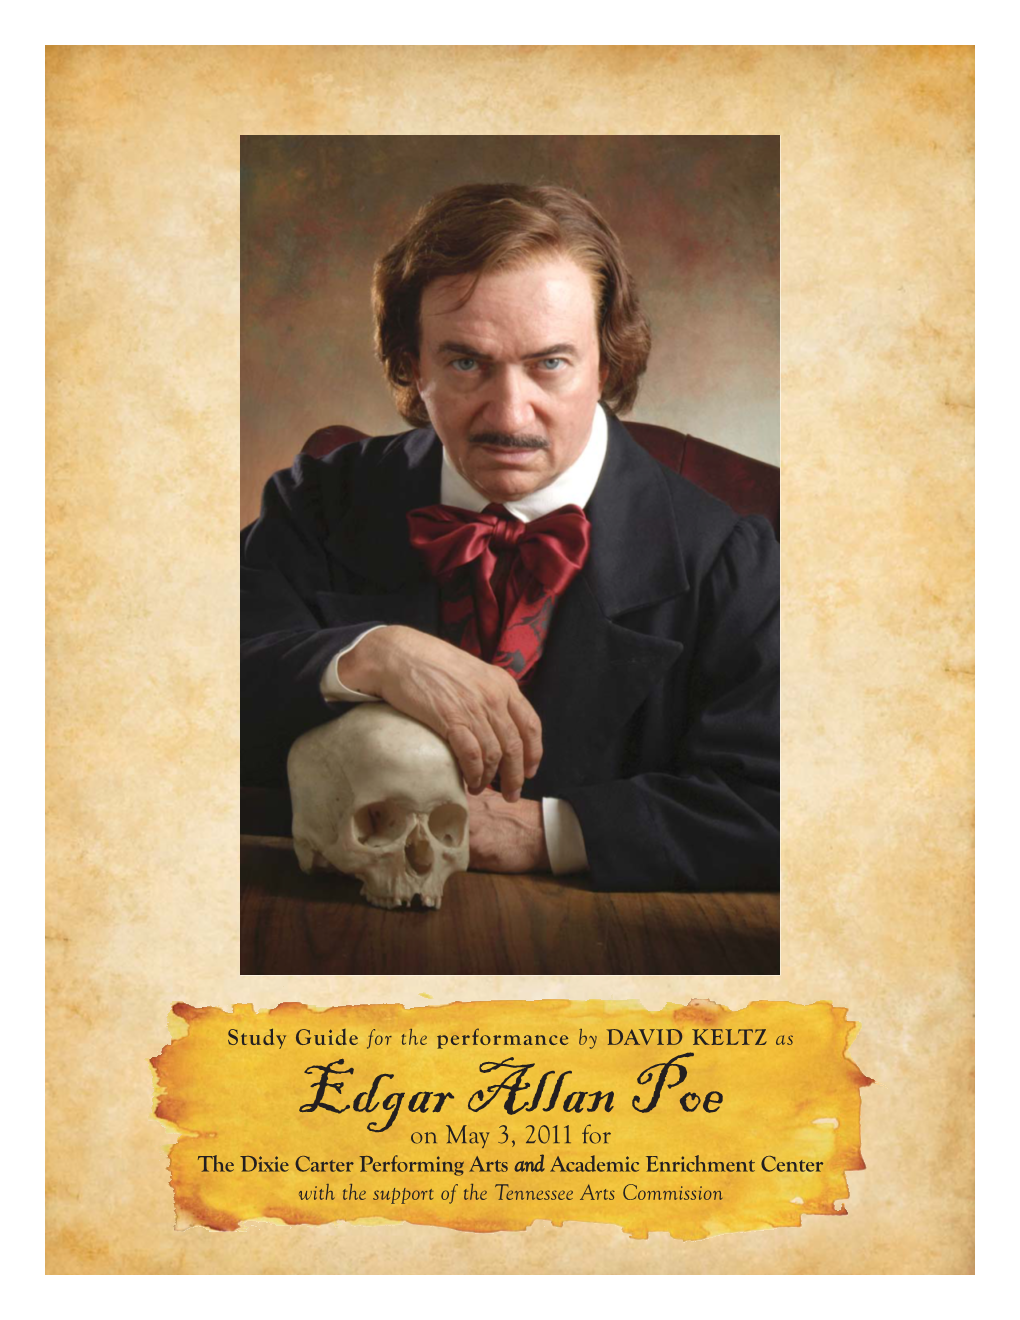 Edgar Allan Poe on May 3, 2011 for the Dixie Carter Performing Arts and Academic Enrichment Center with the Support of the Tennessee Arts Commission Table of Contents